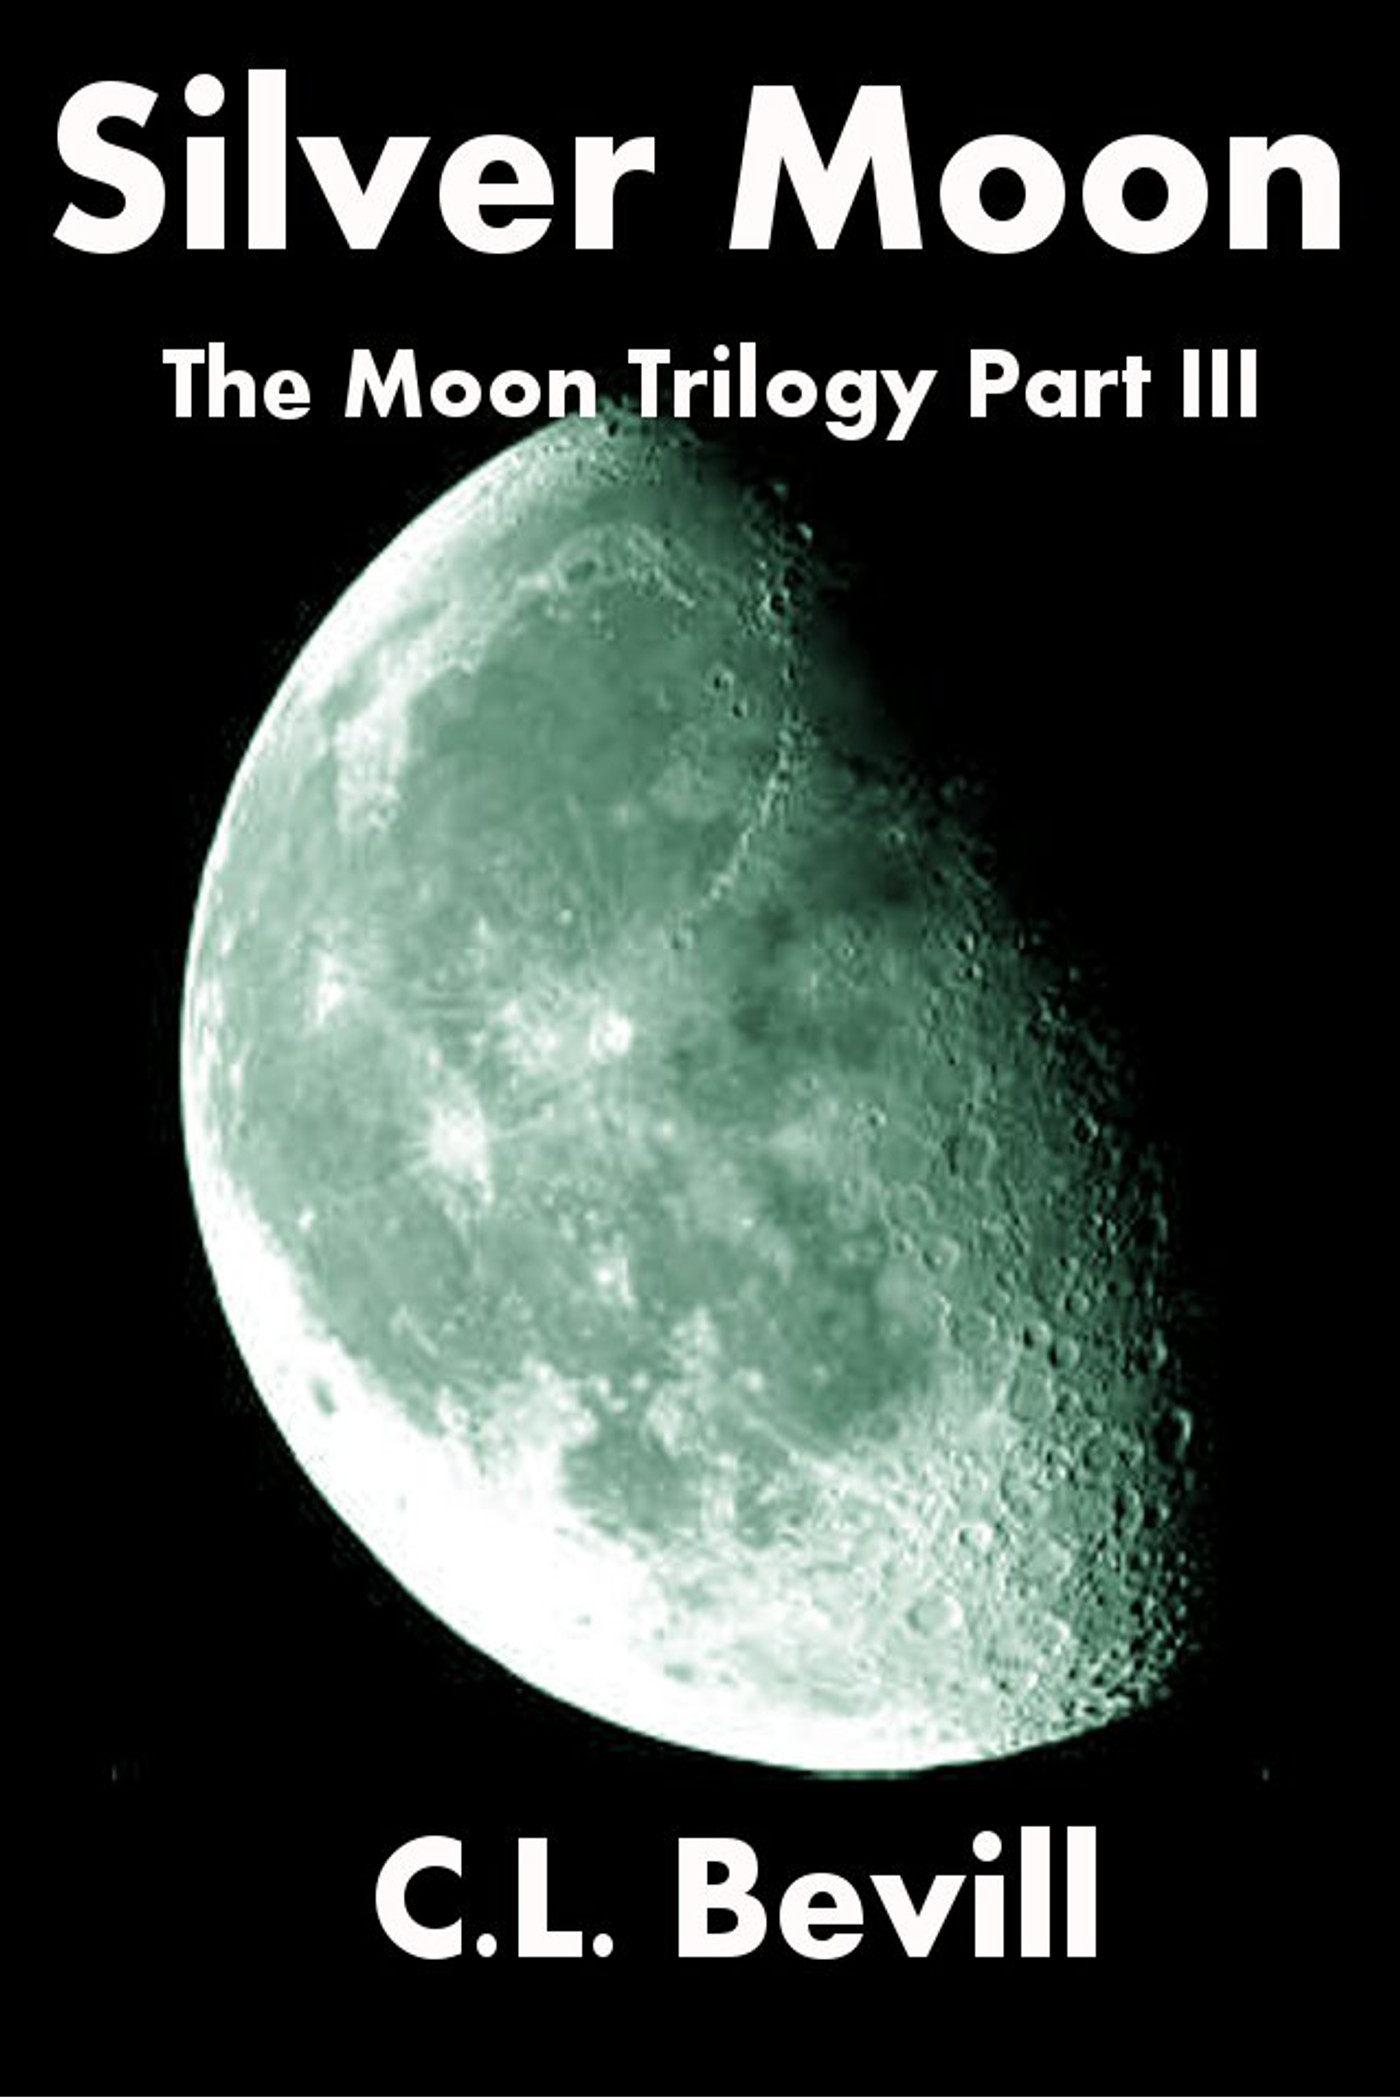 Image result for silver moon trilogy by c l bevill